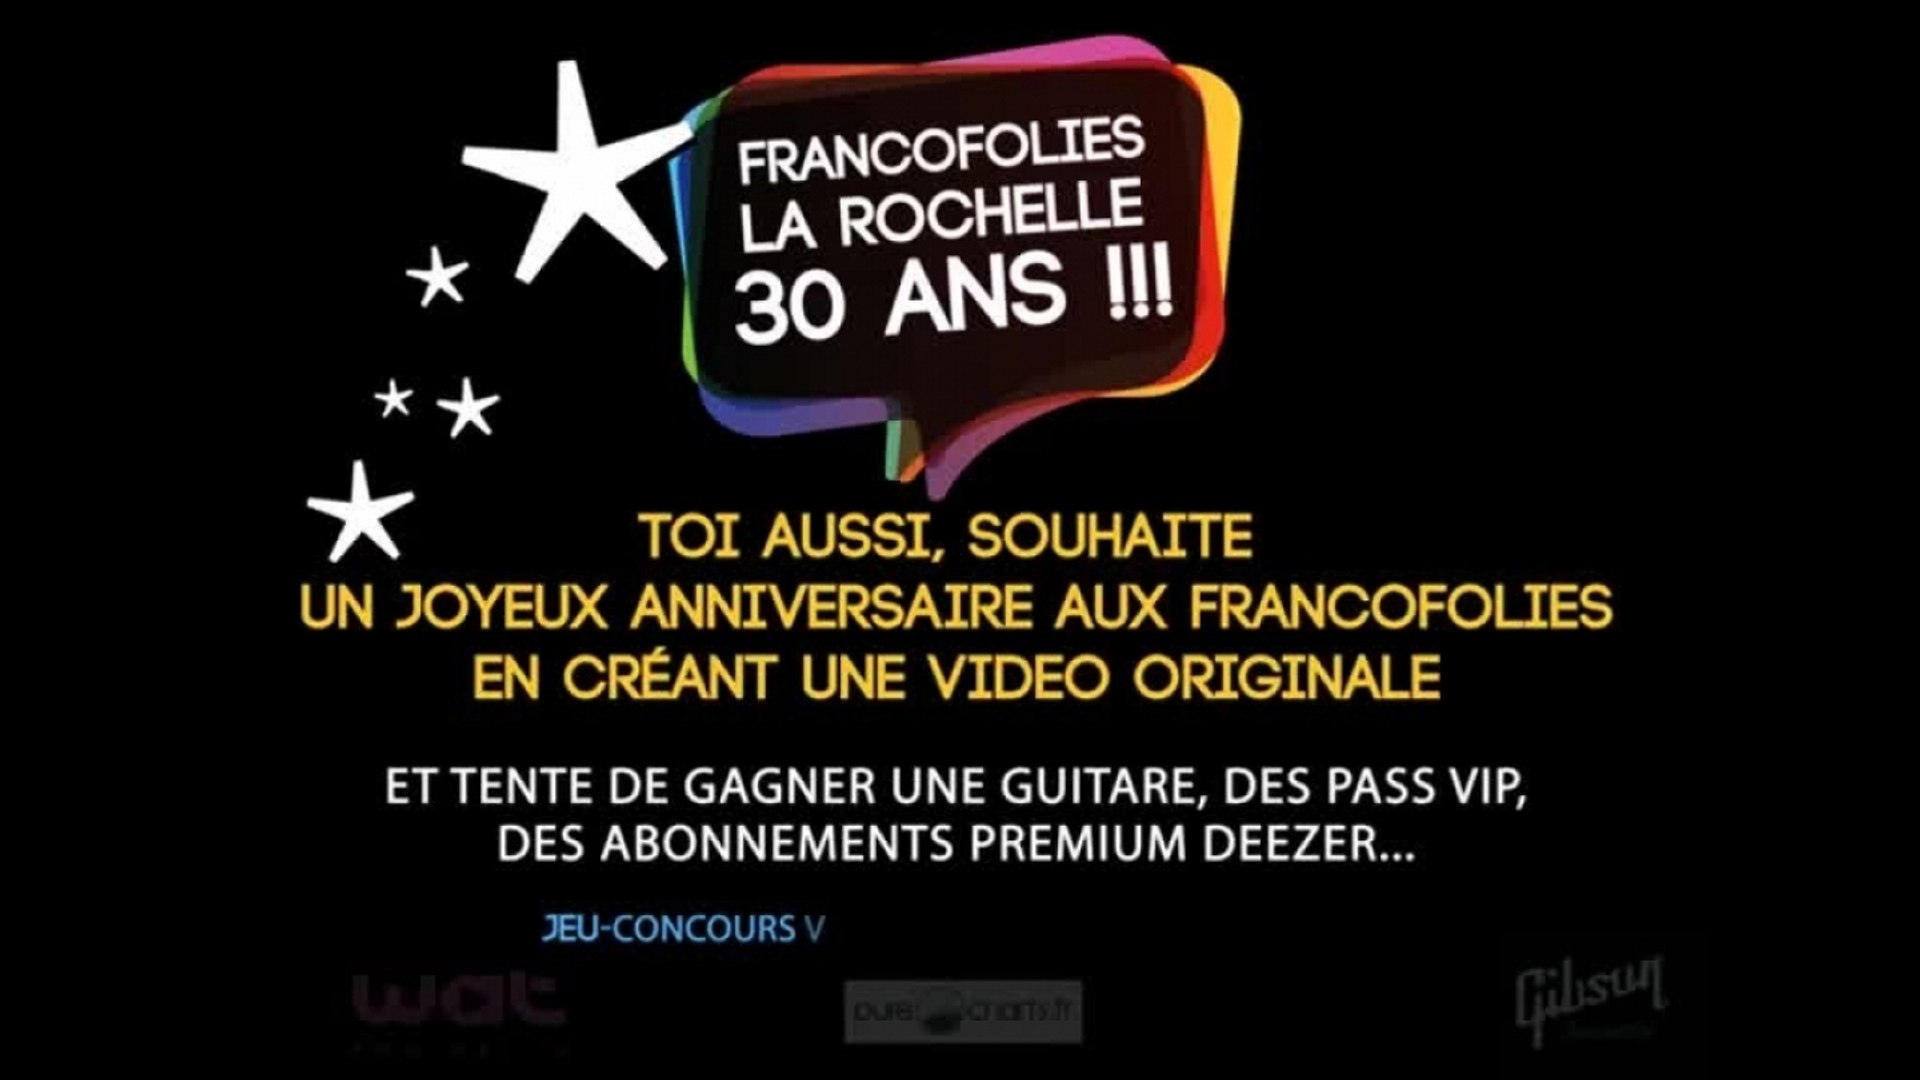 Francofolies 14 Concours Video Anniversaire Teaser Video Dailymotion